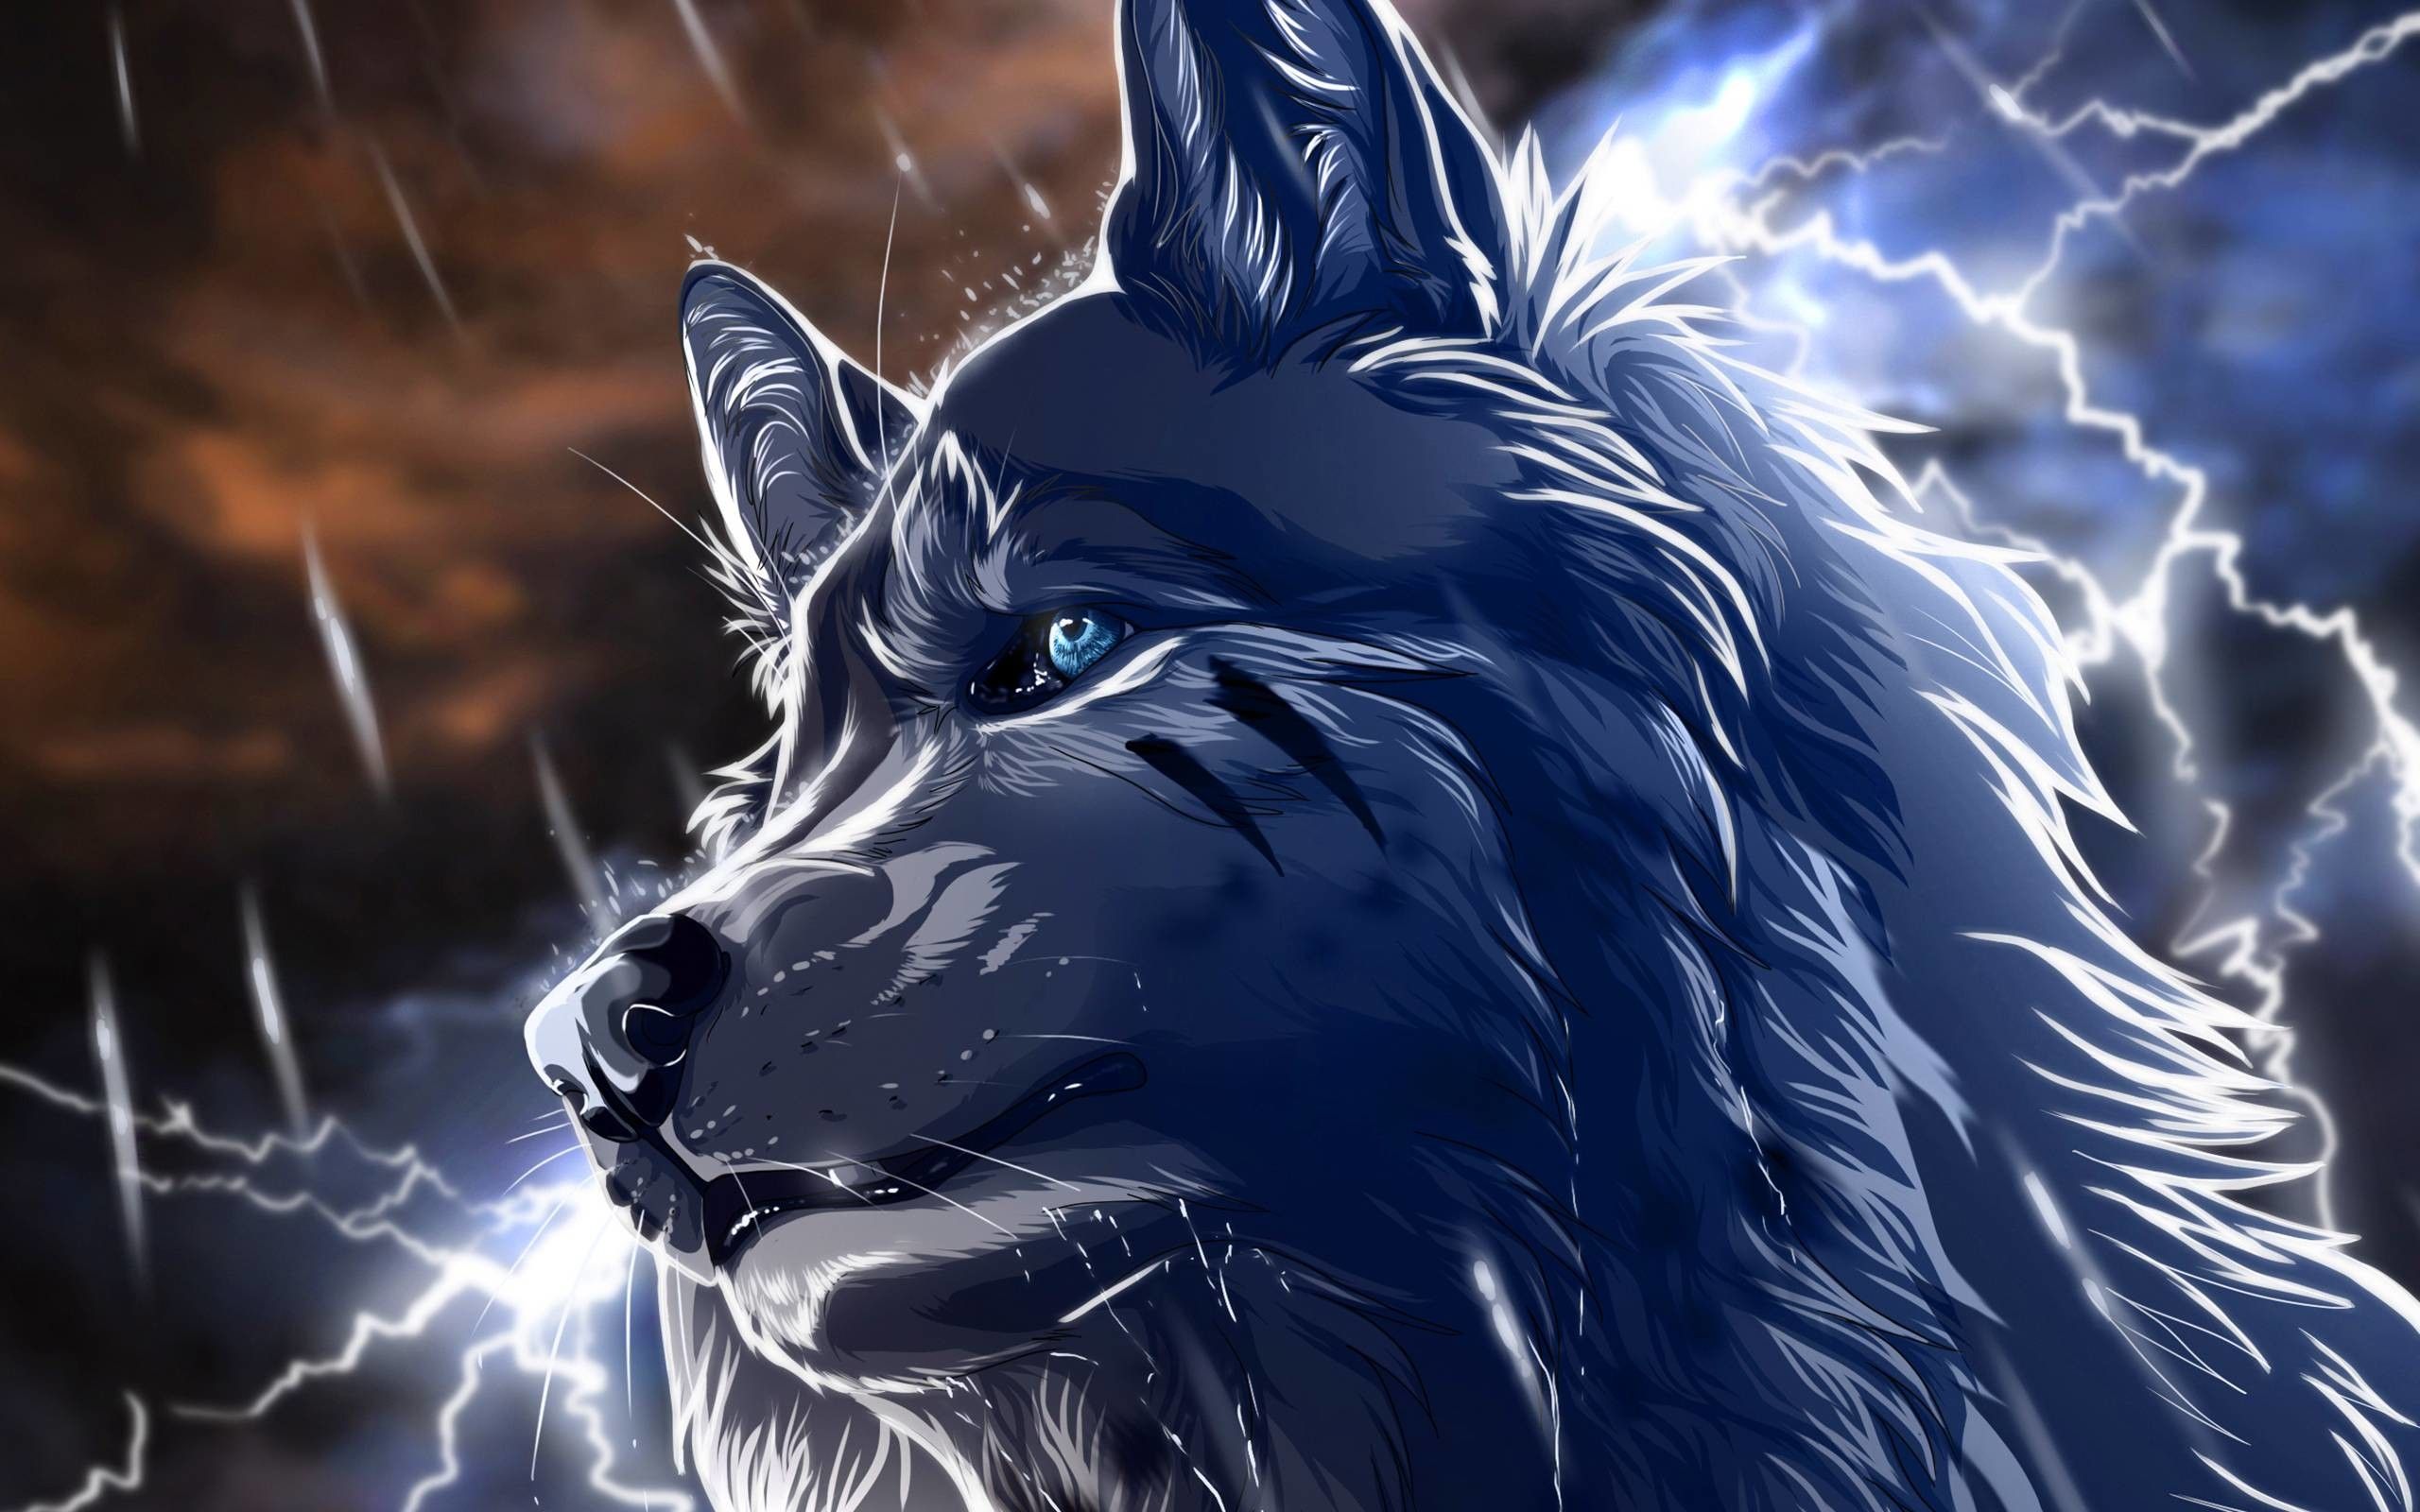 Cool Animated Wolf Wallpapers #Cool #Animated #Wolf #Wallpapers | Wolf  wallpaper, Cool animations, Wolf background